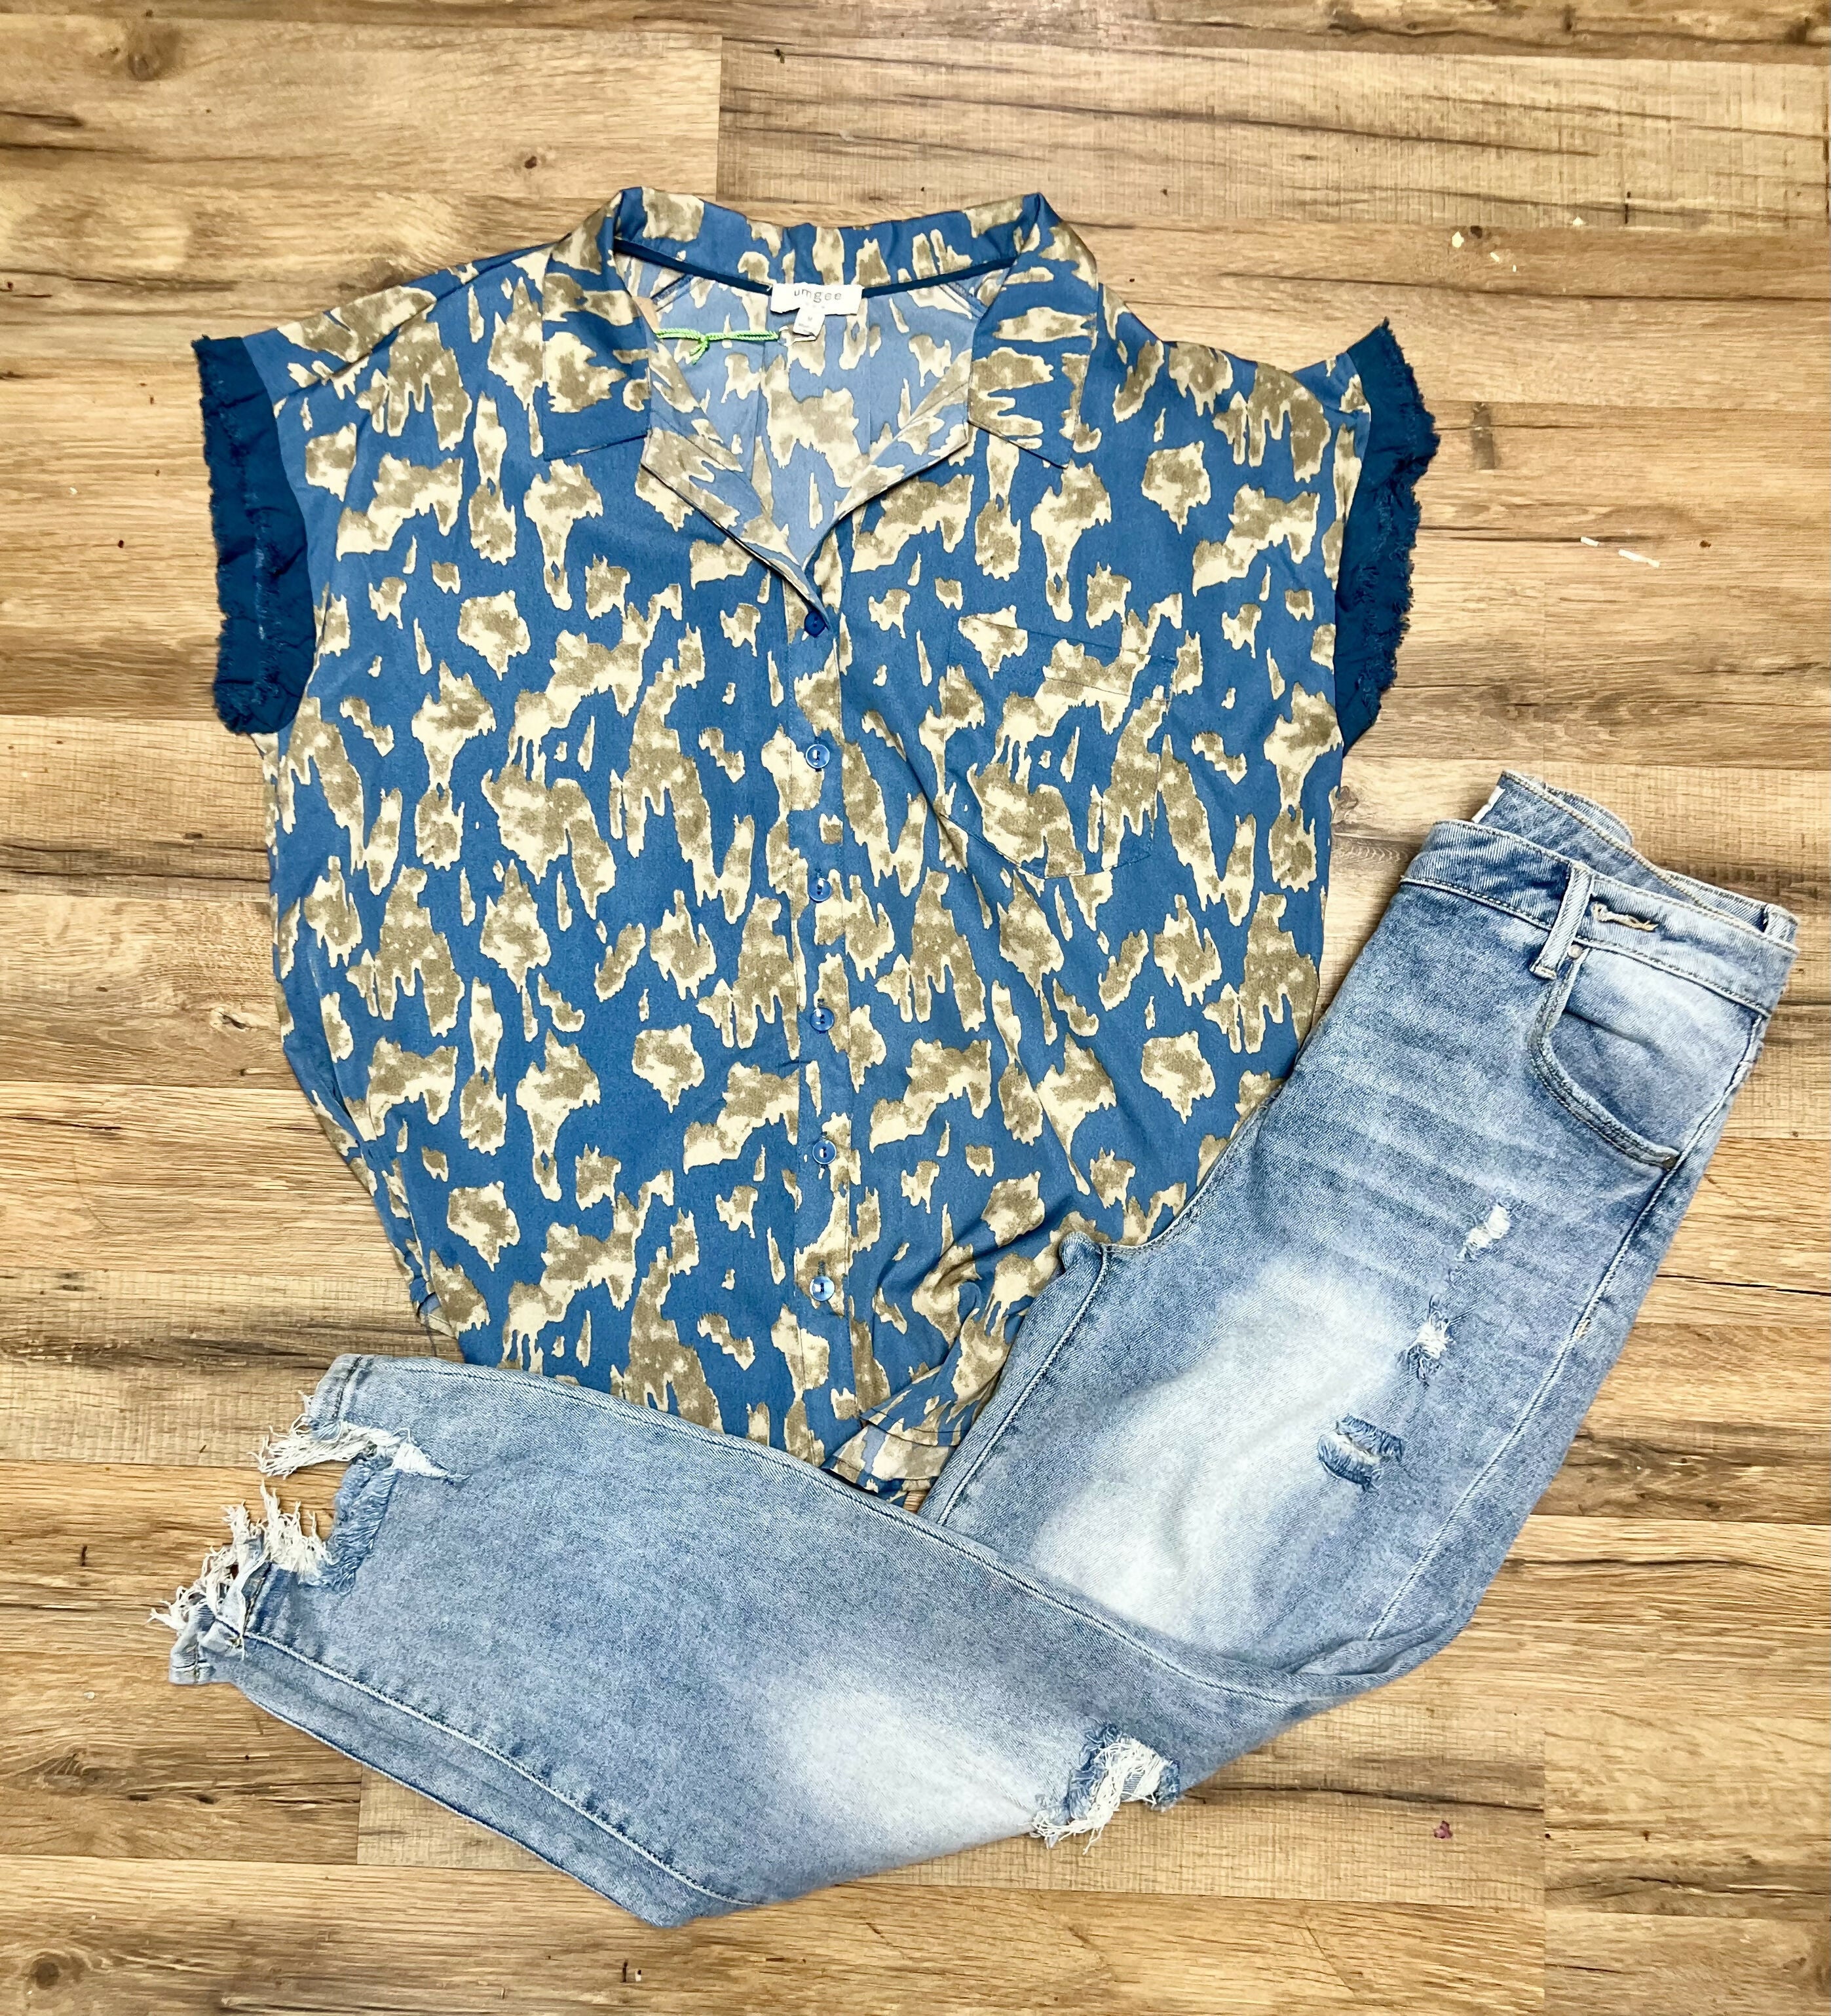 Angie Slate Blue Leopard Top-Short Sleeves-Vintage Cowgirl-Deadwood South Boutique, Women's Fashion Boutique in Henderson, TX